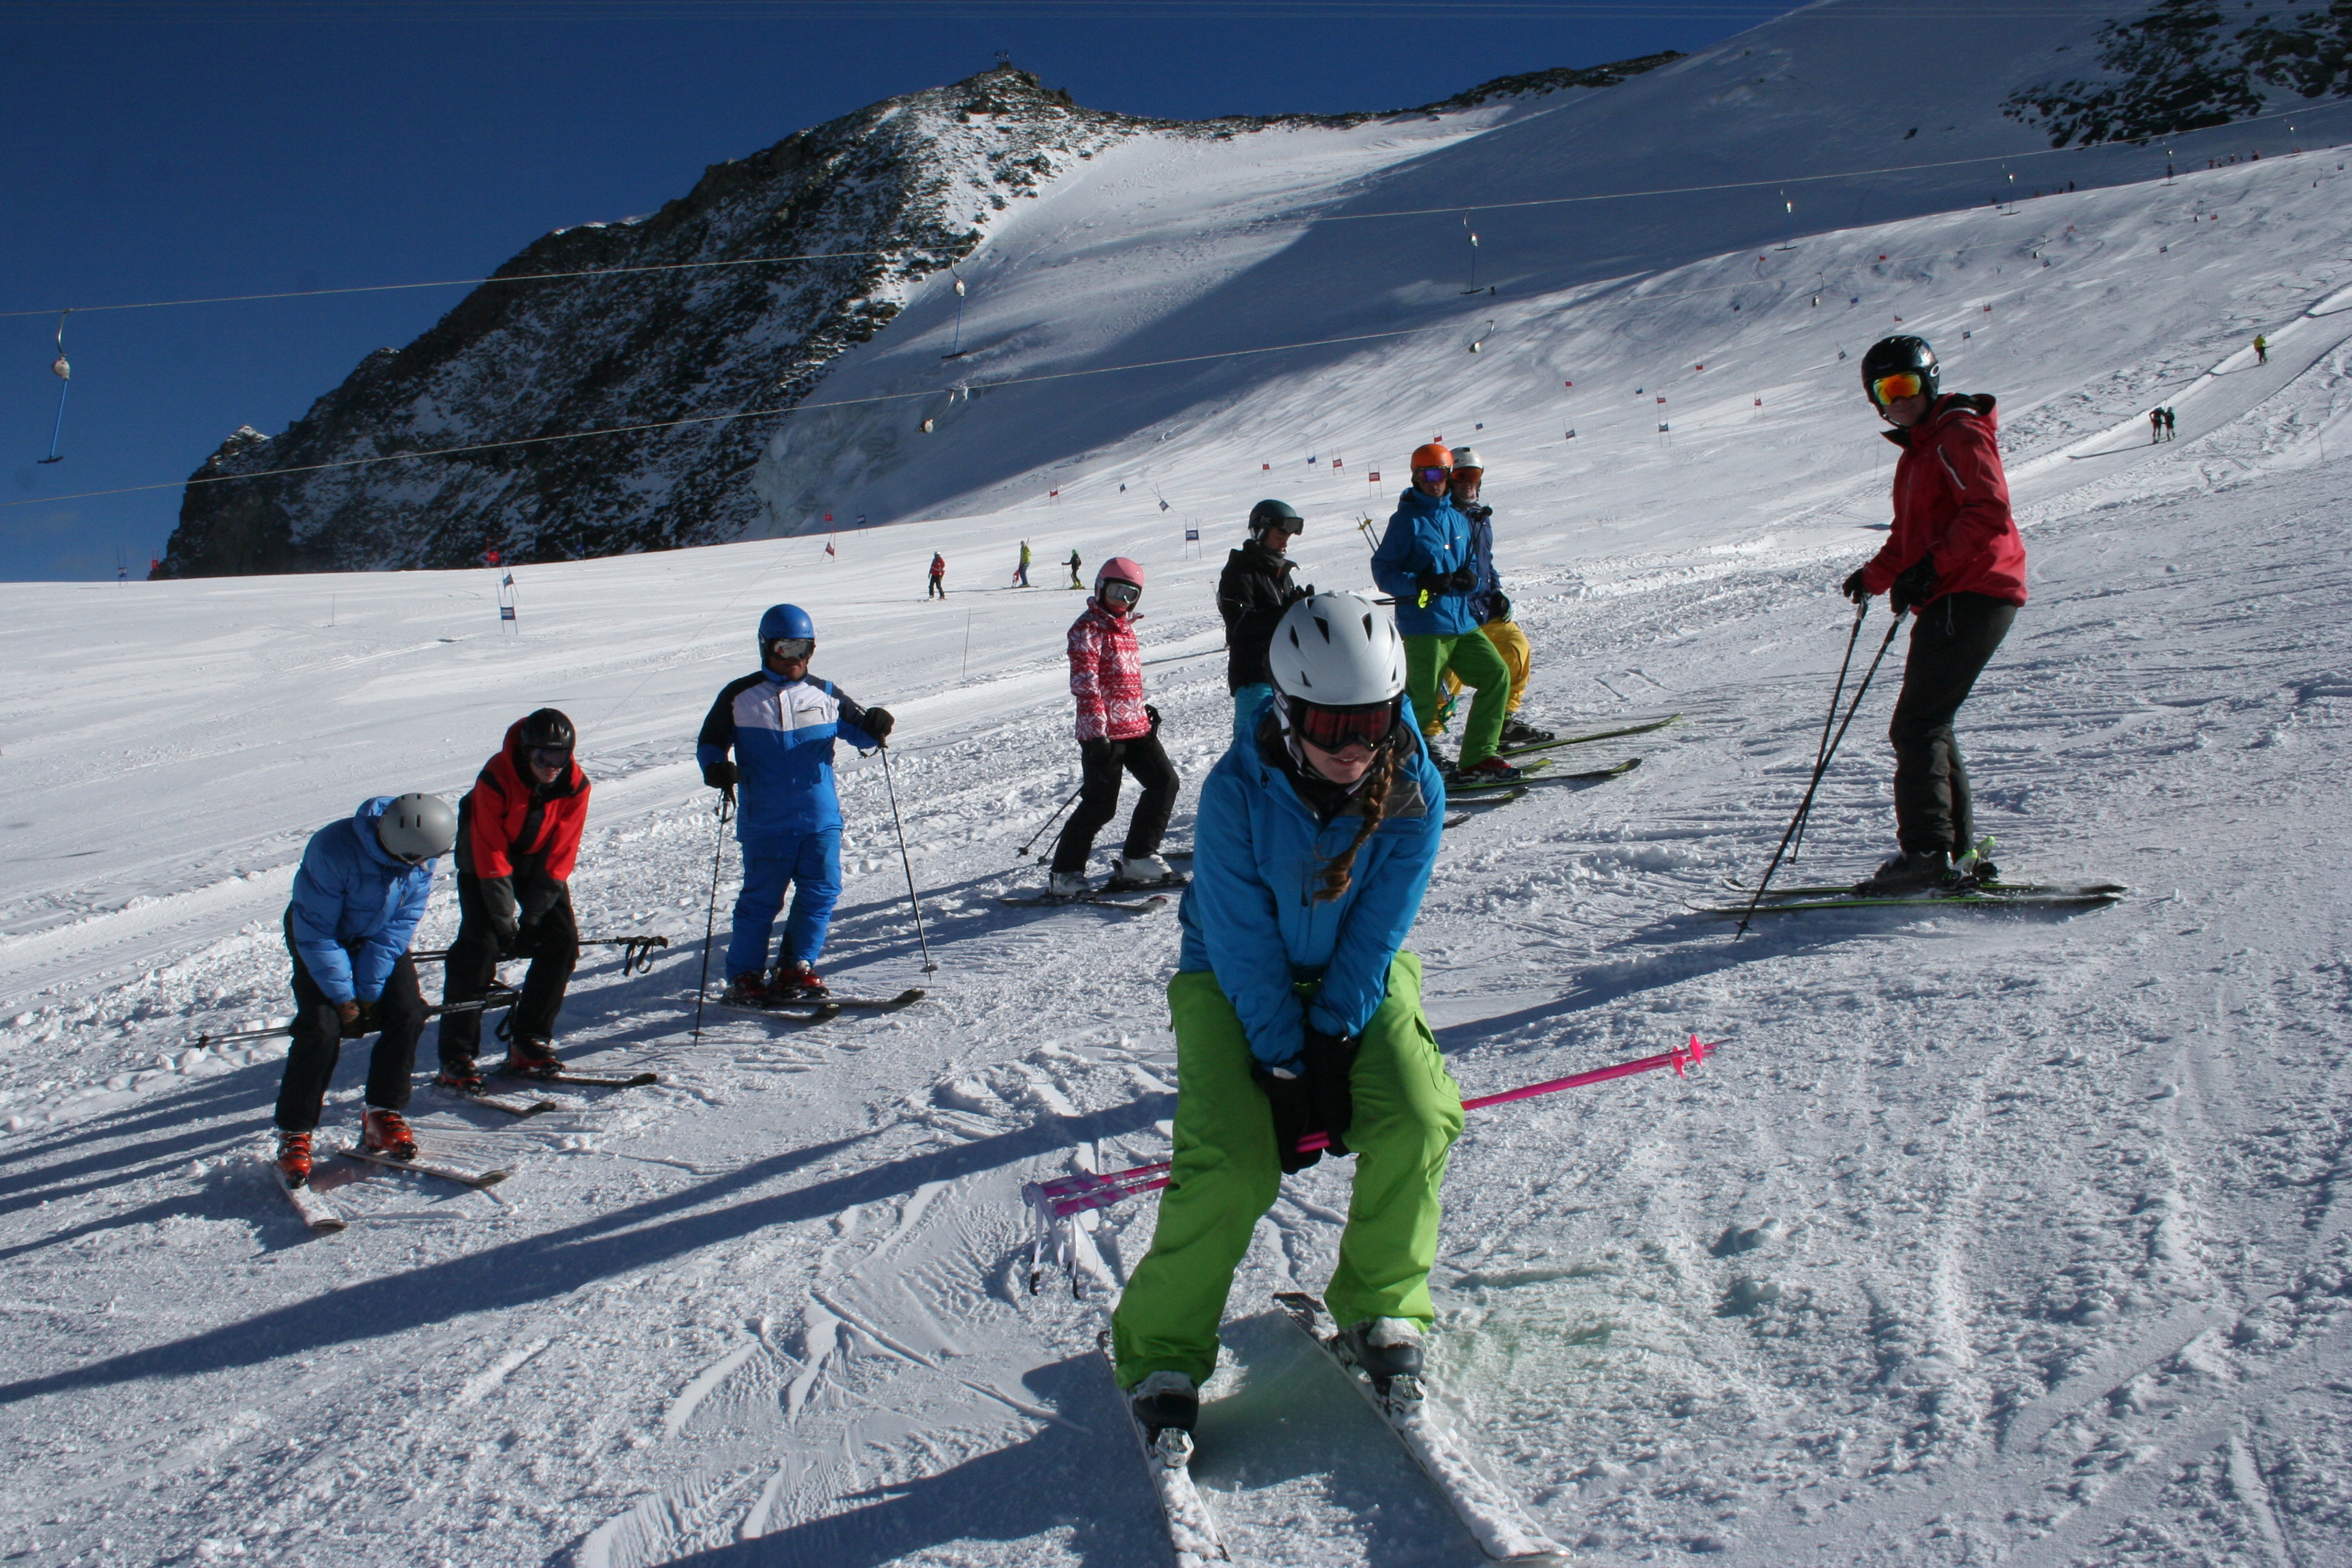 Qualified Snowsport Instructor? Yes We Are!